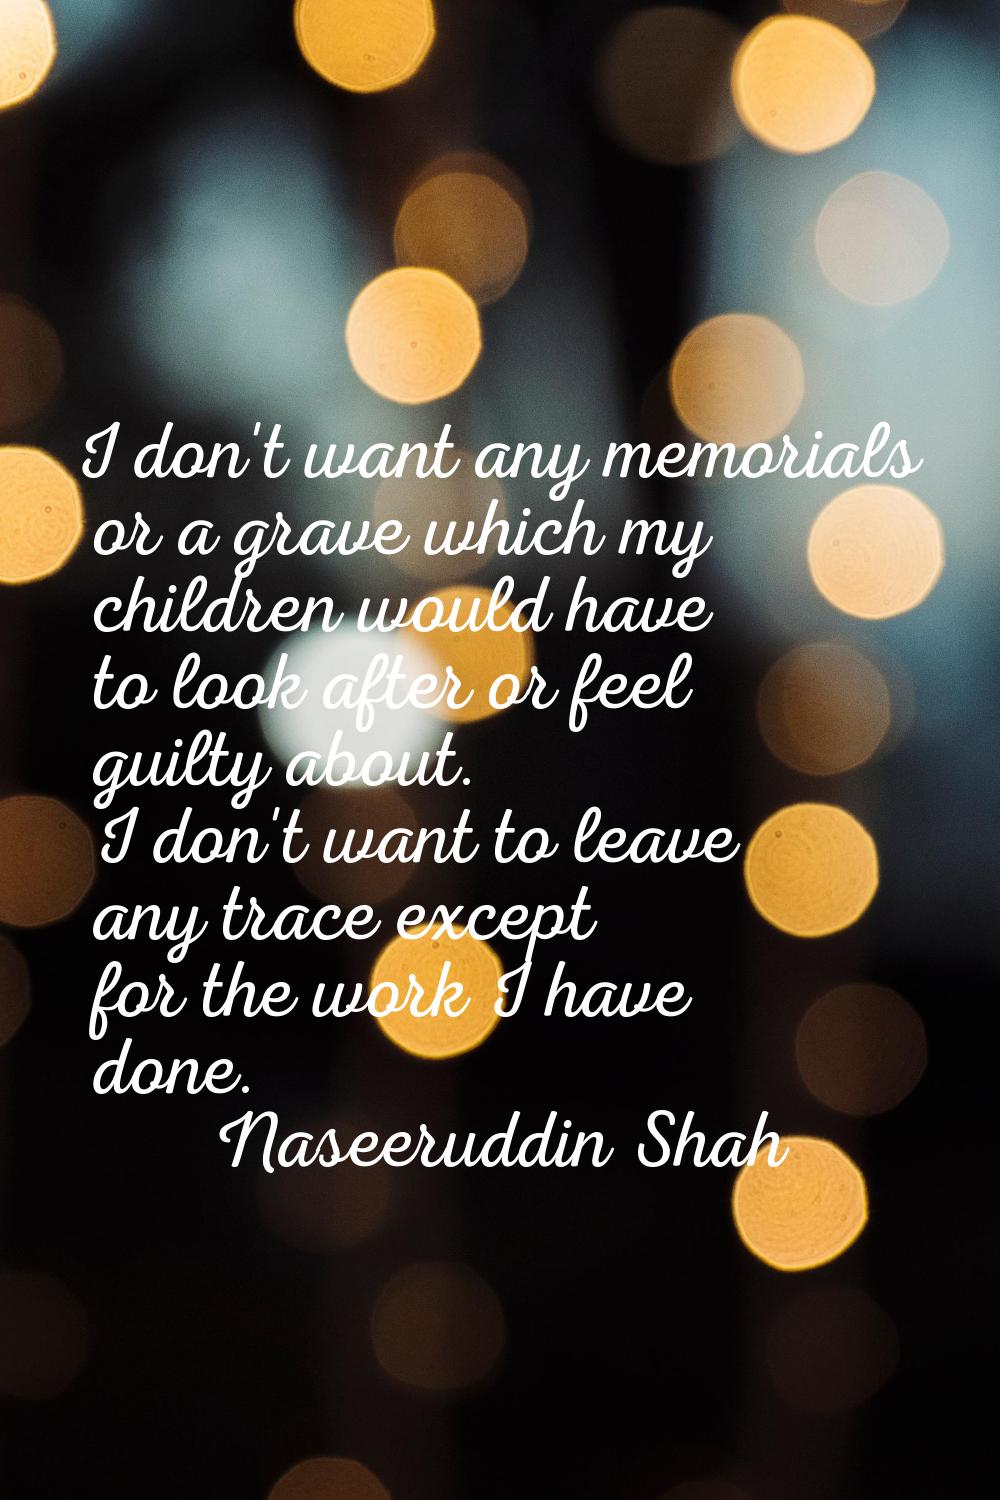 I don't want any memorials or a grave which my children would have to look after or feel guilty abo